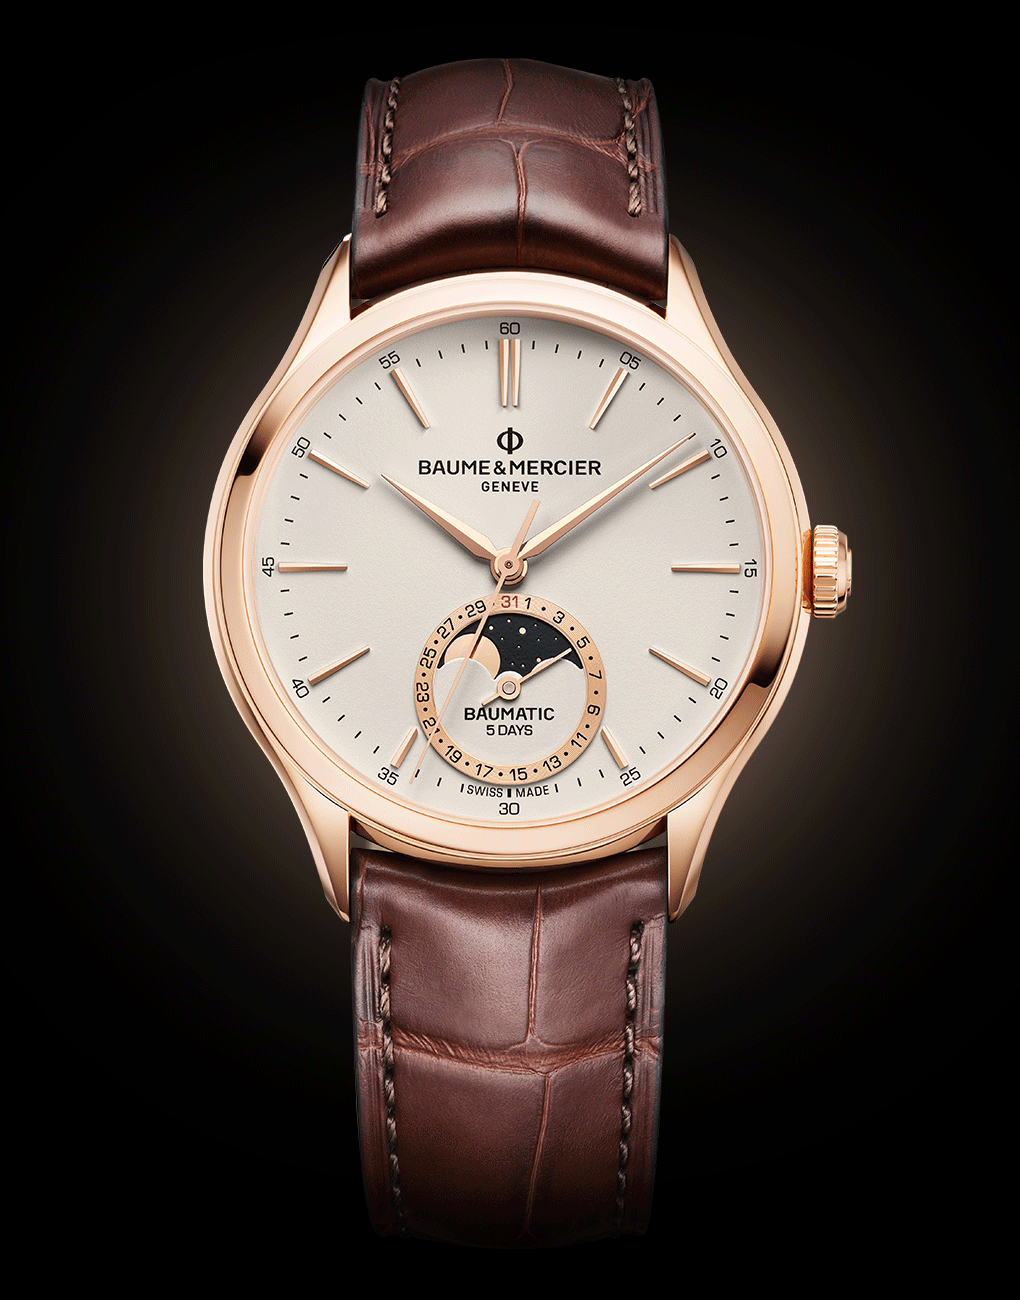 Presenting The Baume & Mercier Clifton Baumatic Gold Watches